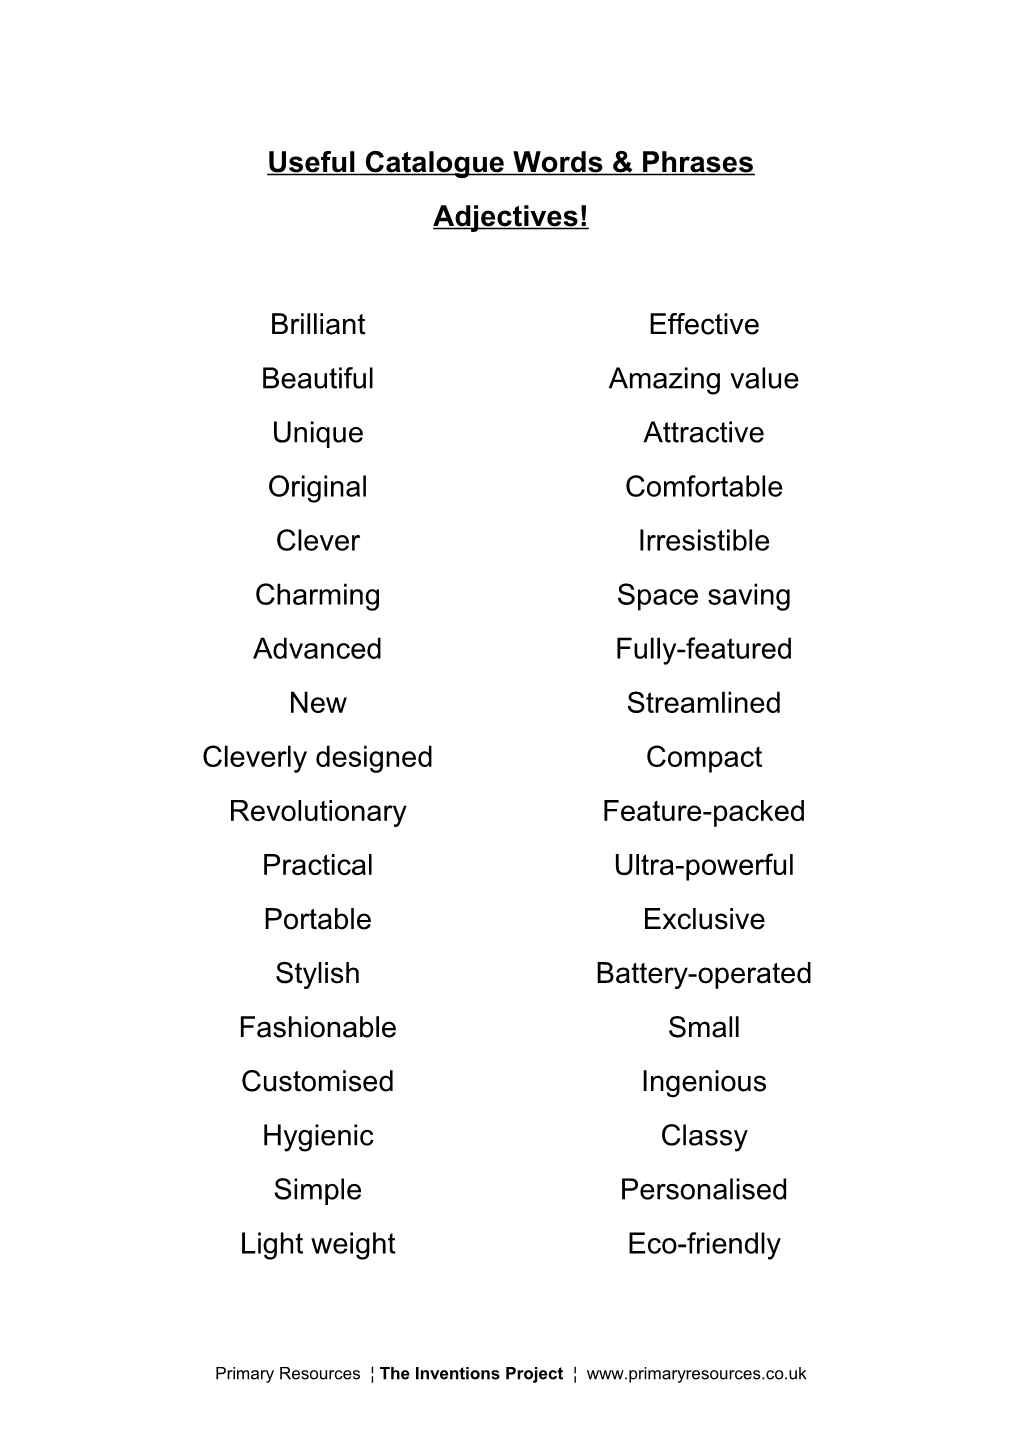 Useful Catalogue Words & Phrases